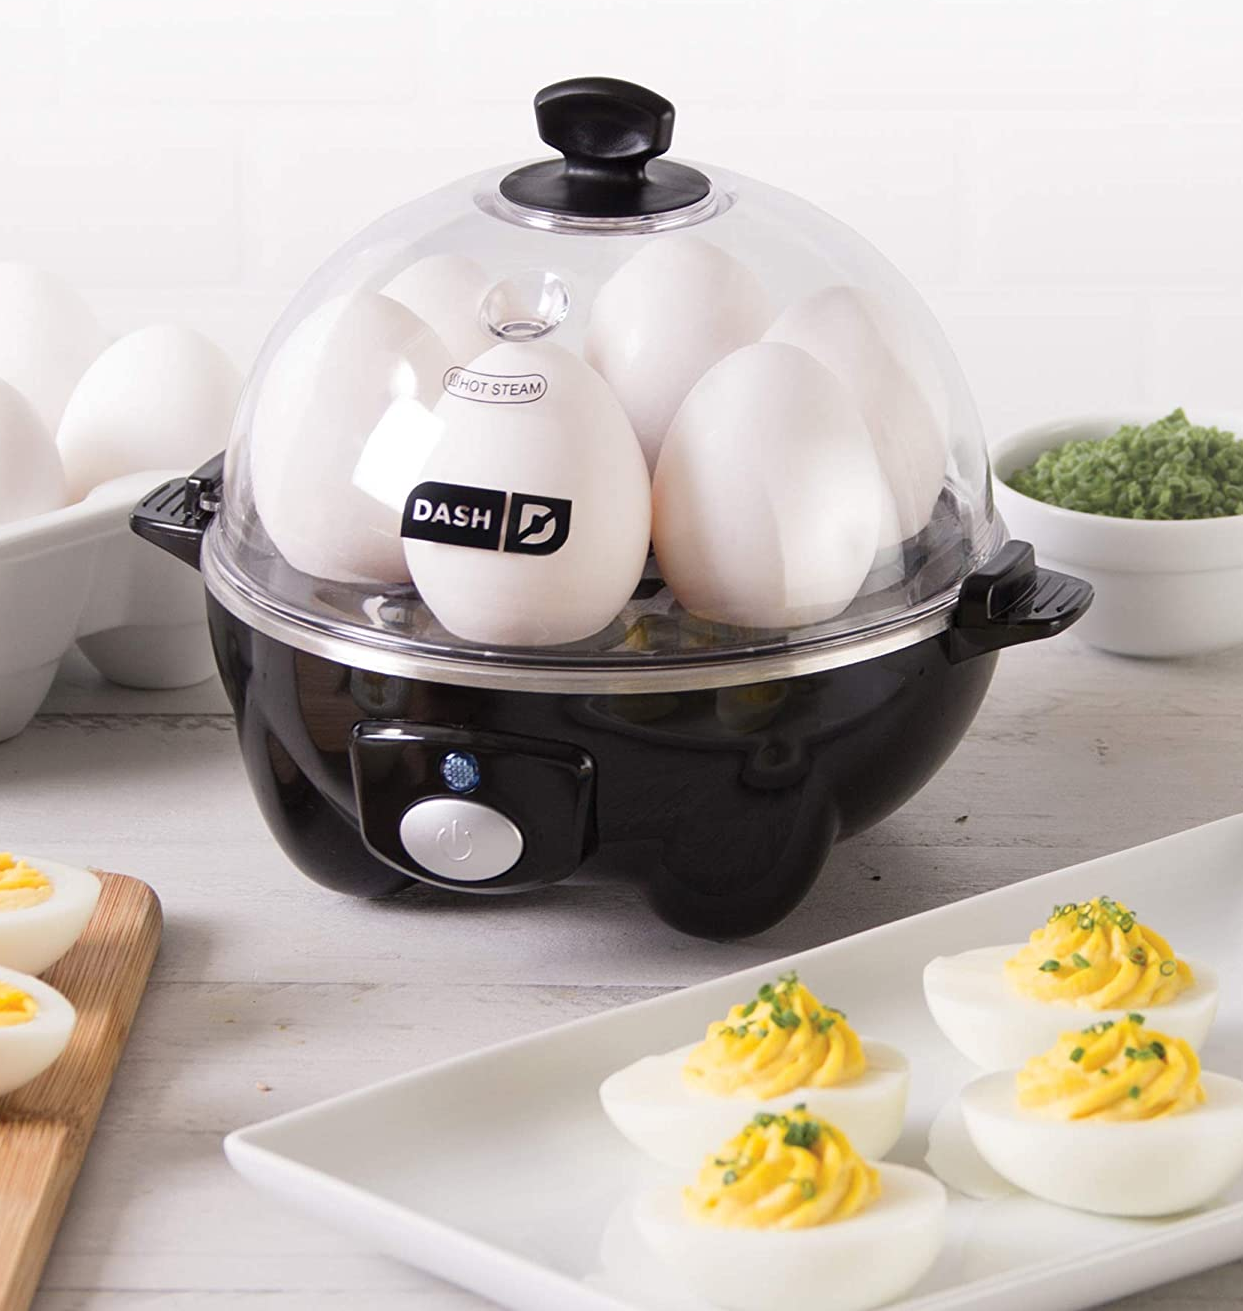 the black egg cooker filled with eggs, next to a tray of deviled eggs on a counter